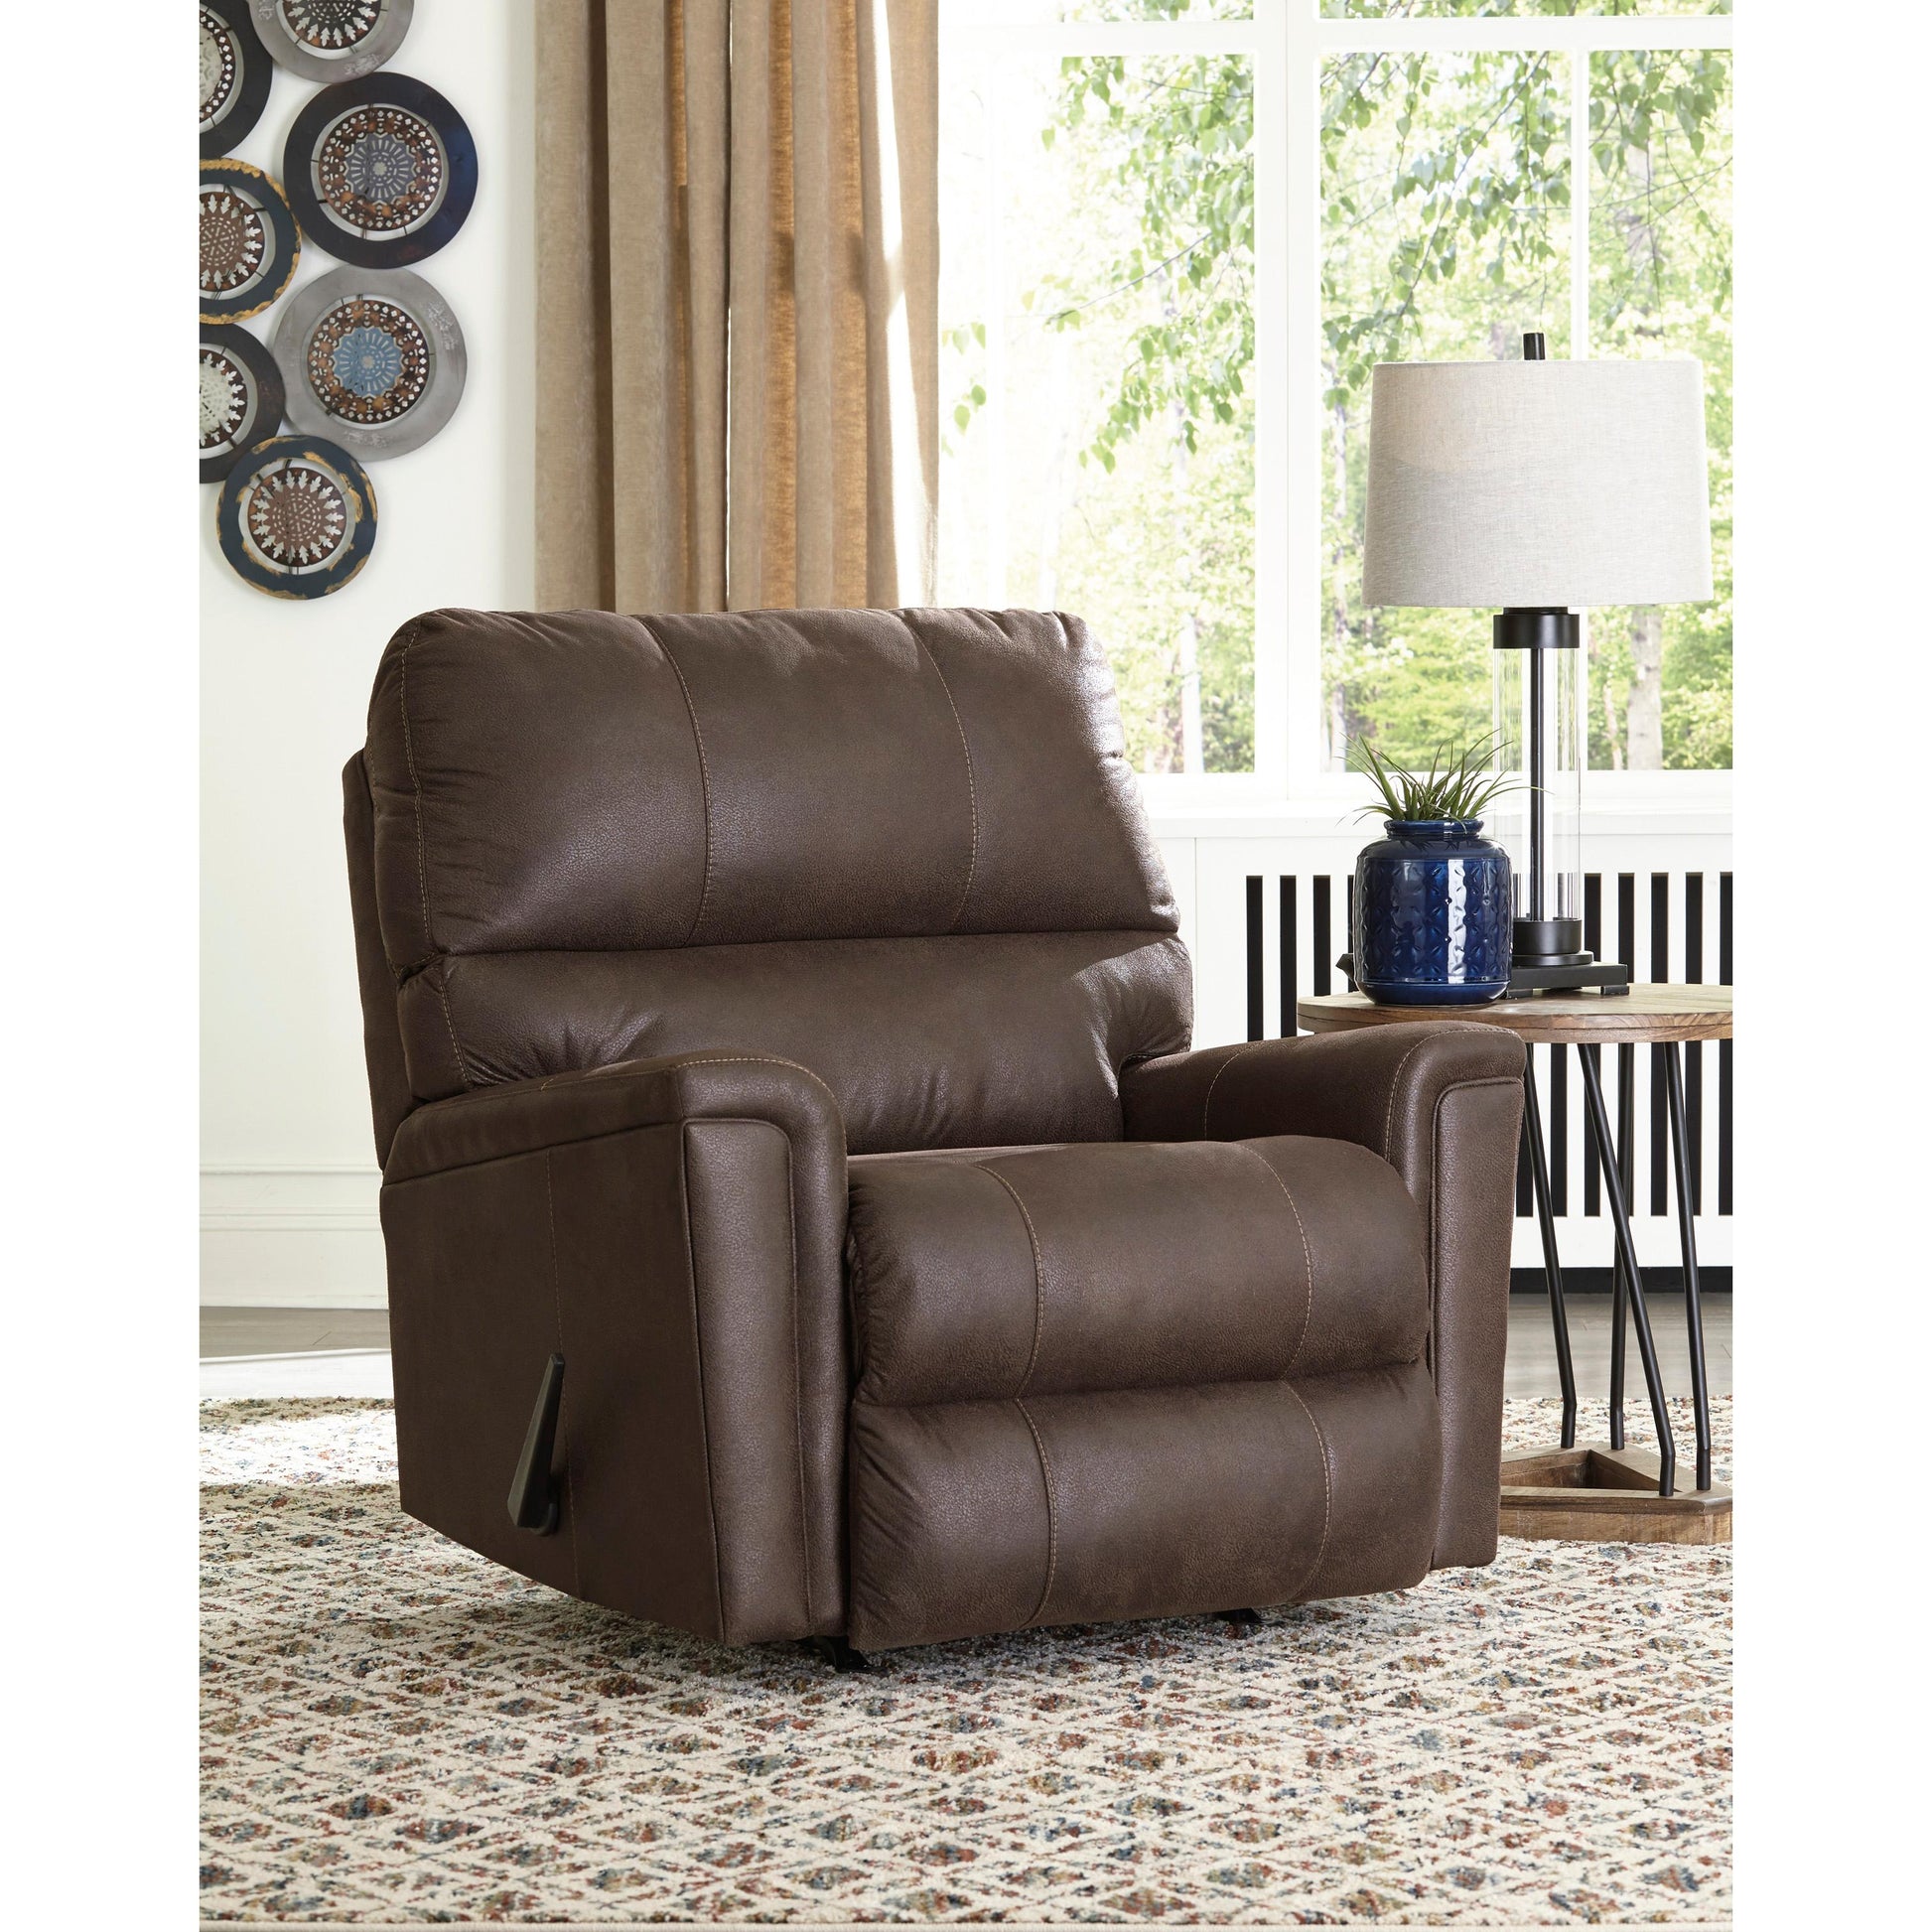 Signature Design by Ashley Navi Rocker Leather Look Recliner 9400325 IMAGE 6